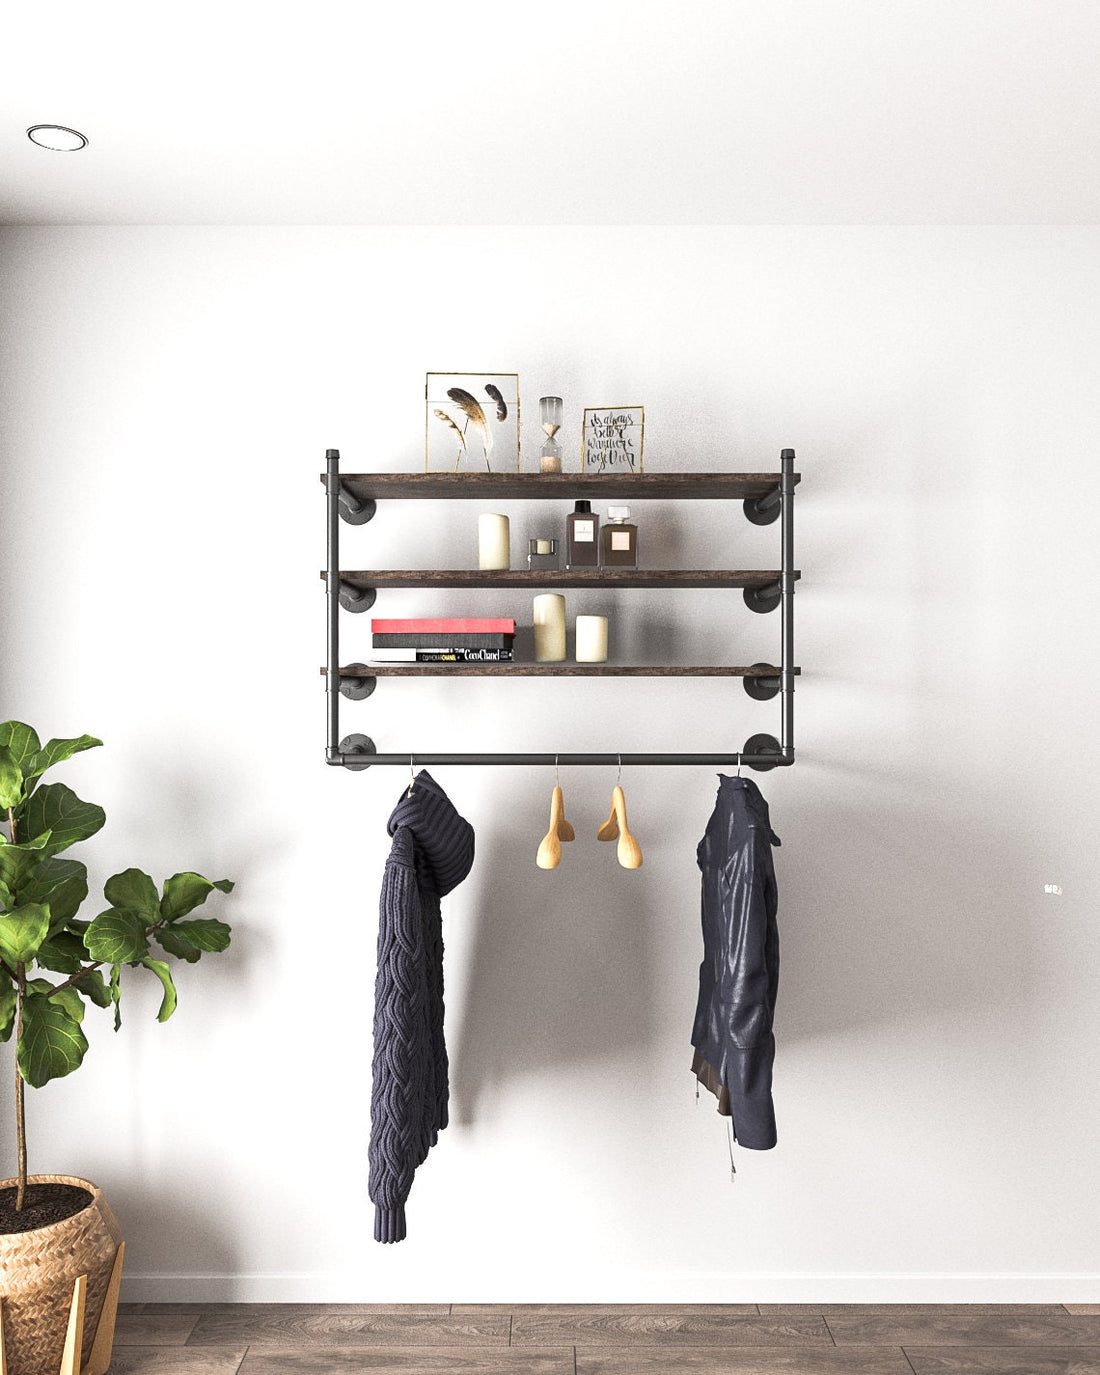 Emdo Versatile Wall Mounted Clothes Rail with Shelves